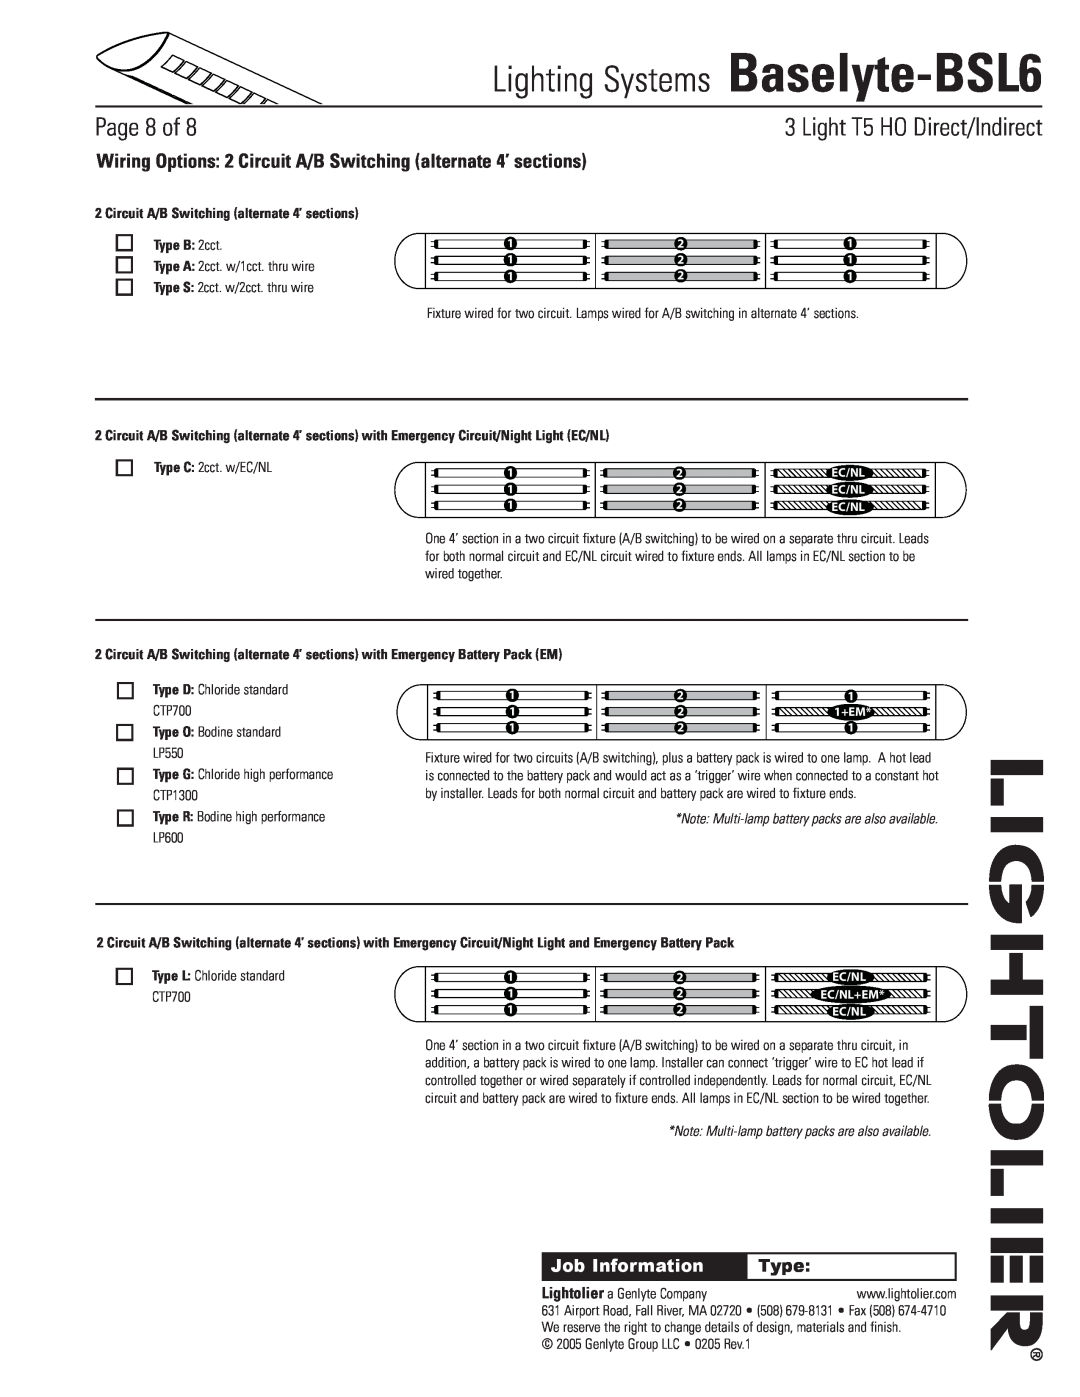 Lightolier Baselyte-BSL6 Circuit A/B Switching alternate 4’ sections, Type B 2cct, Type O Bodine standard LP550, Page of 